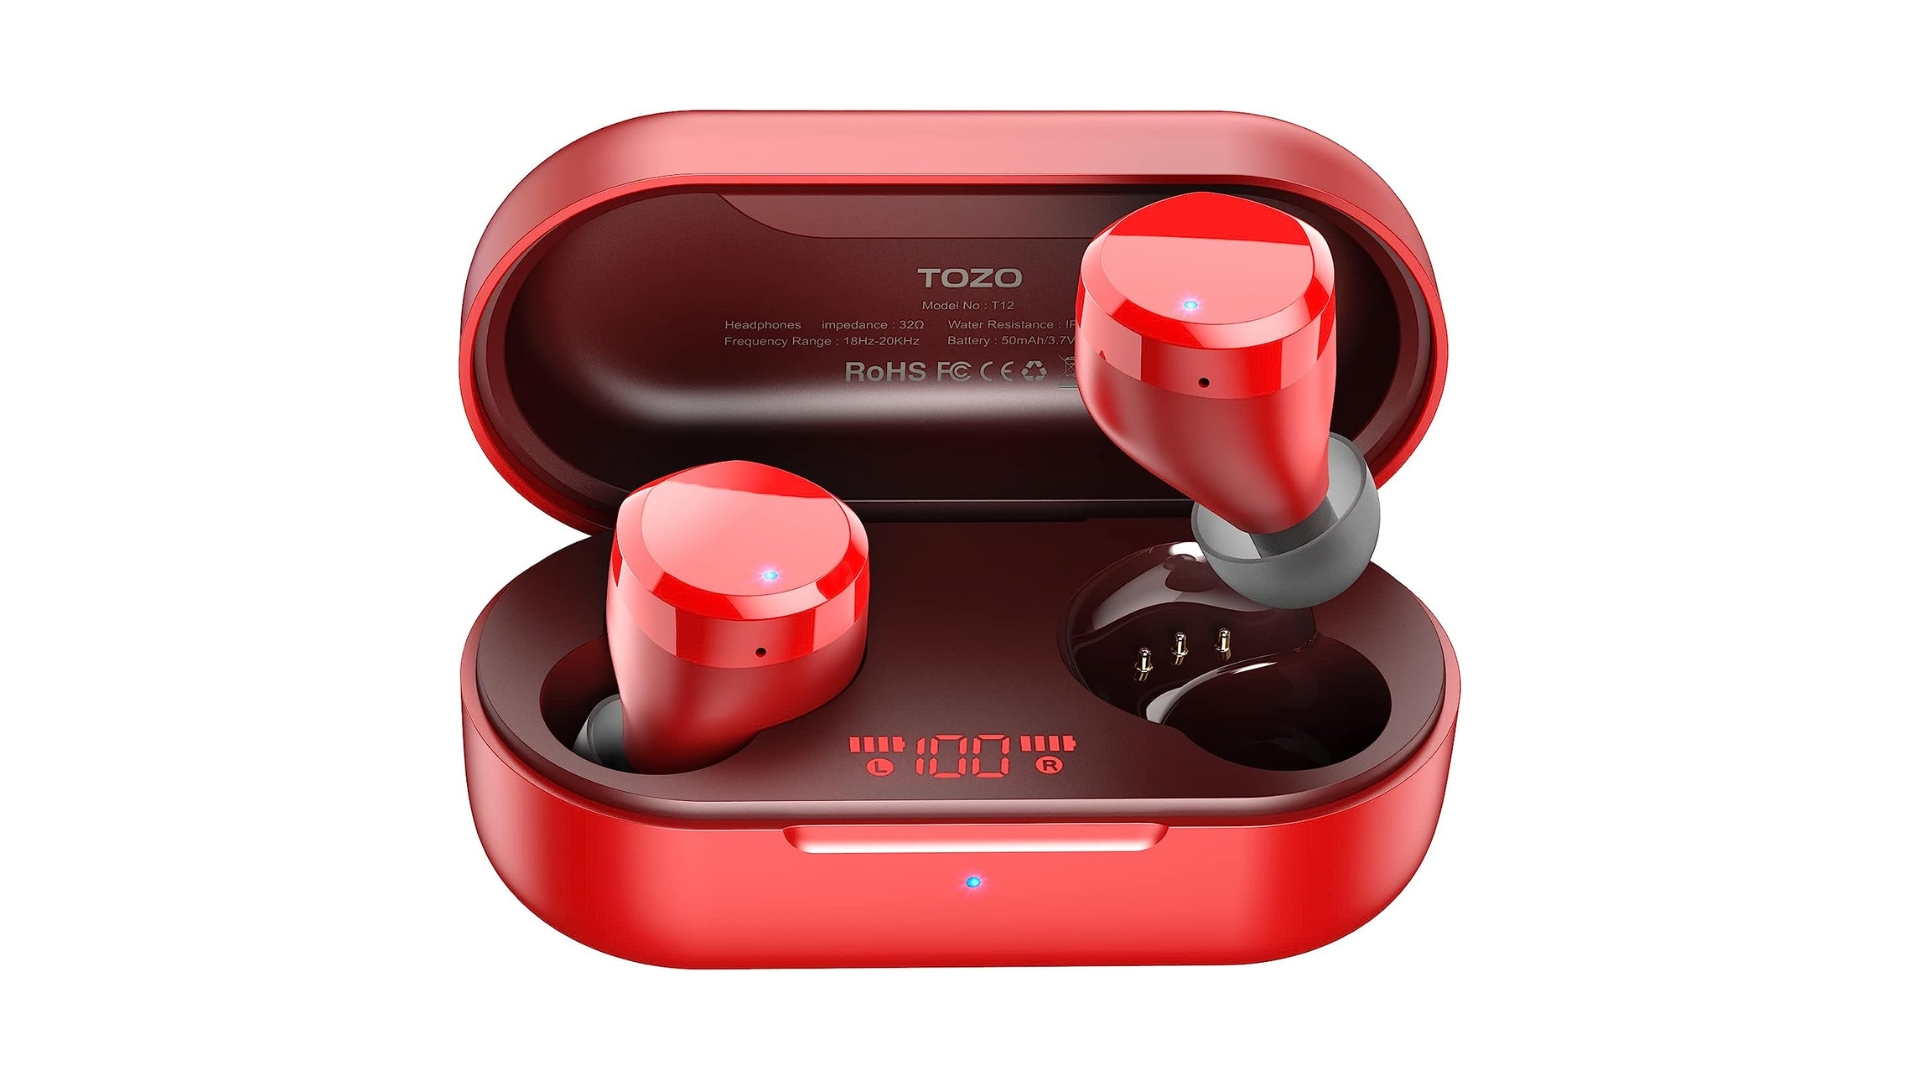 TOZO T12 Wireless Earbuds,Bluetooth 5.3 Version,OrigX Acoustic,IPX8  Waterproof - Red